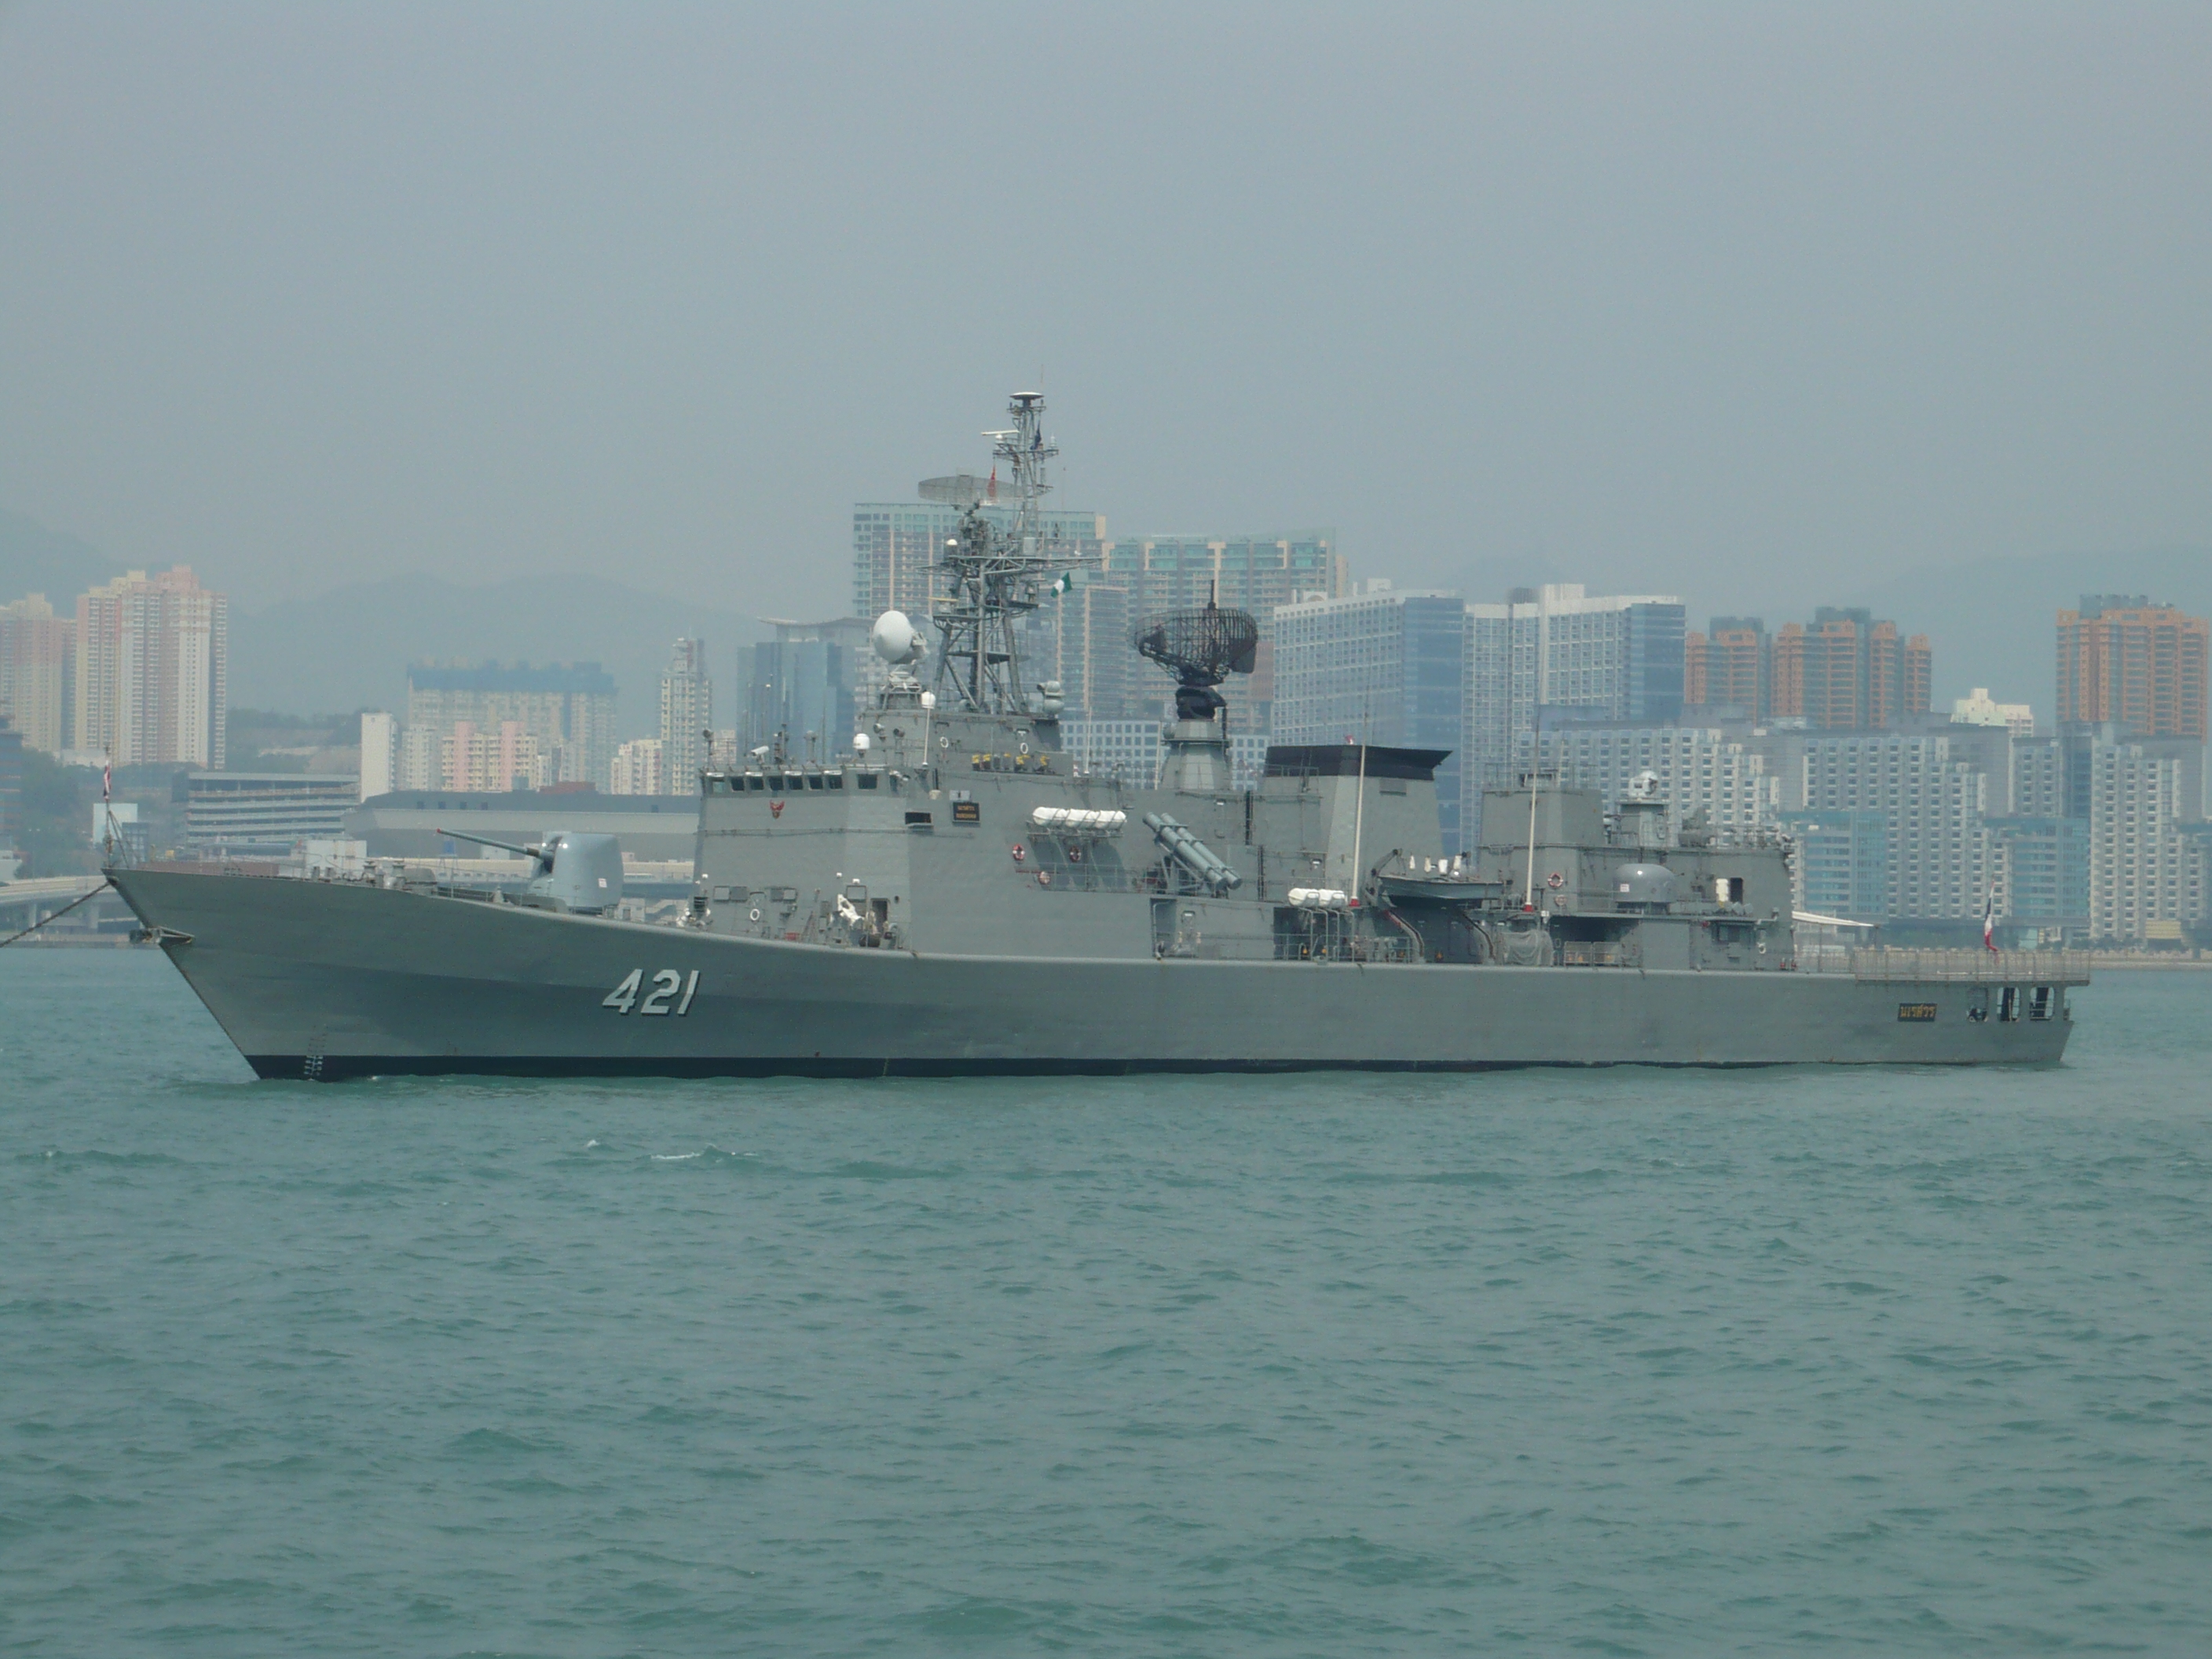 The "HTMS Naresuan" is a Chinese-built Type 025T guided missile frigate in use by the Royal Thai Navy.